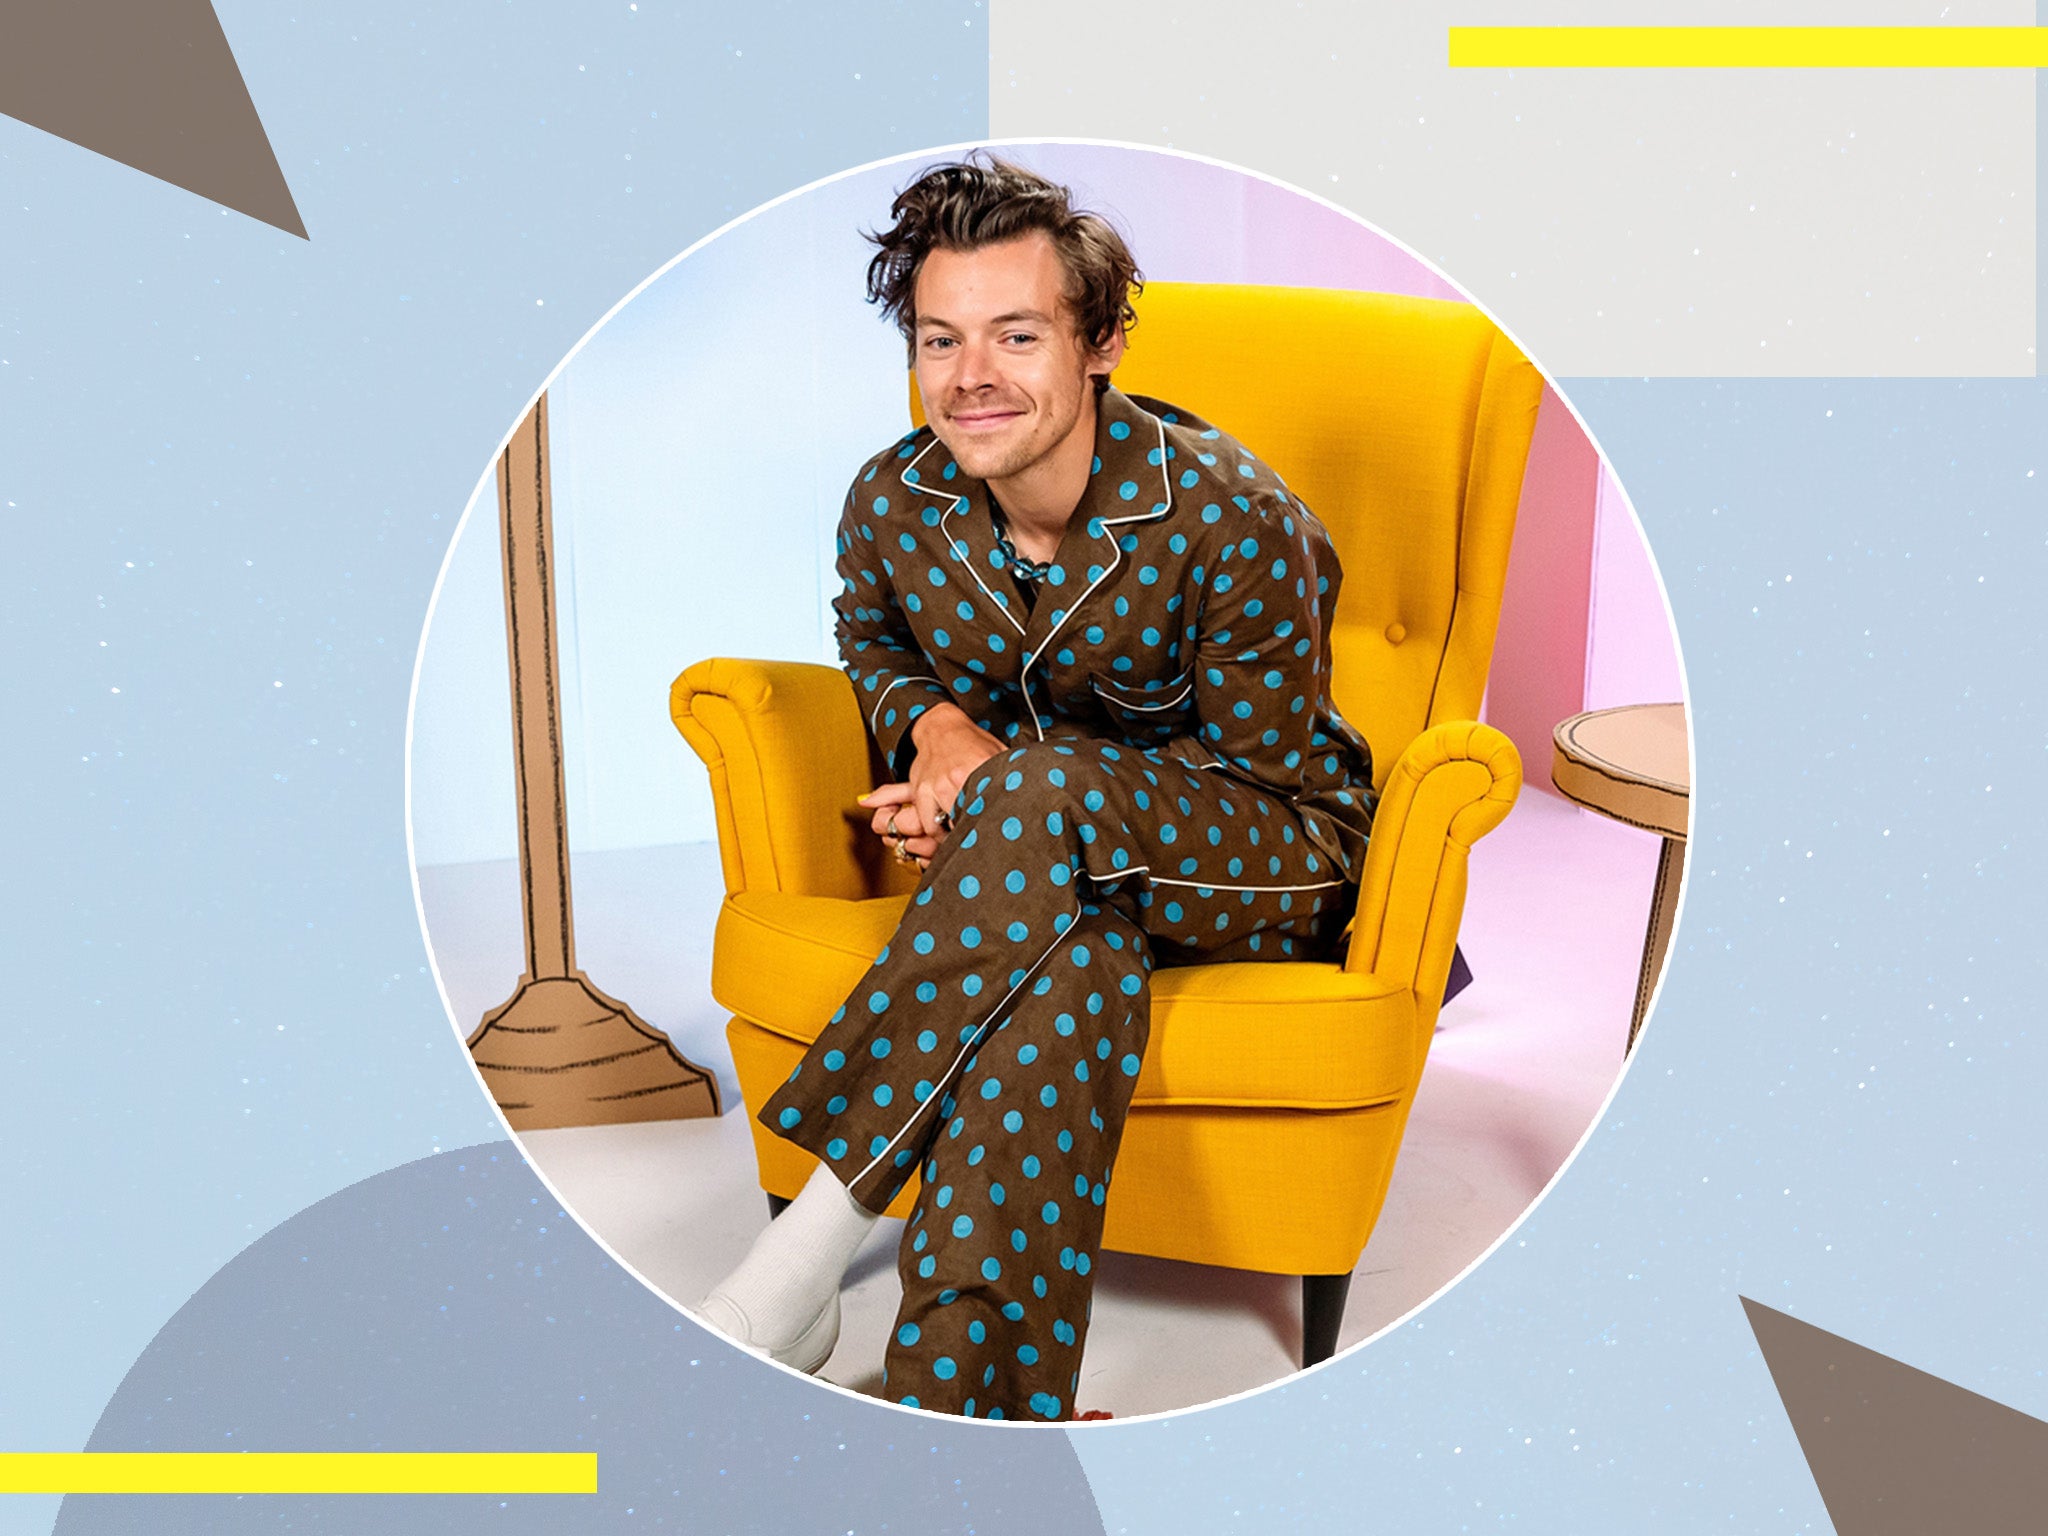 Even in pyjamas he is a style icon